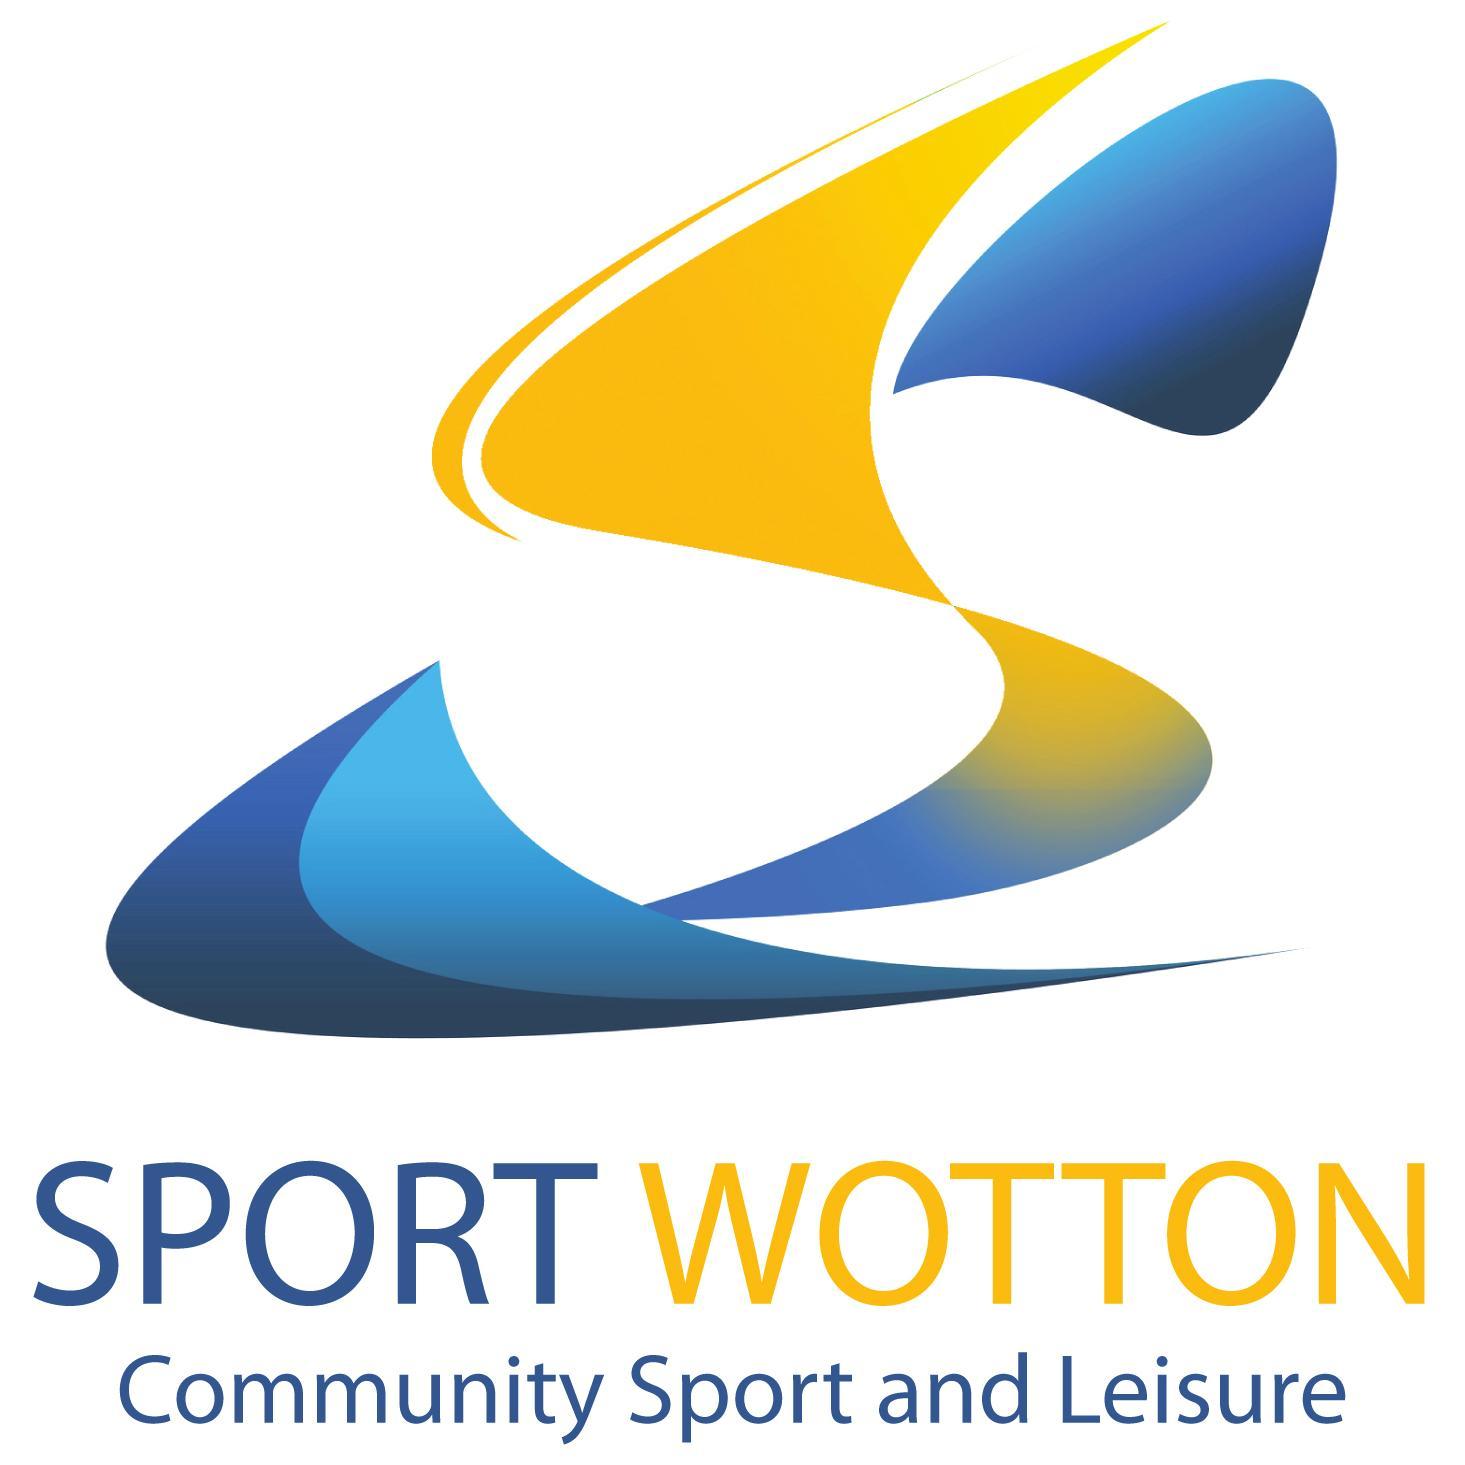 The new company managing the Wotton Sports Centre and New Road pitches, a joint venture by KLBS and WCSF